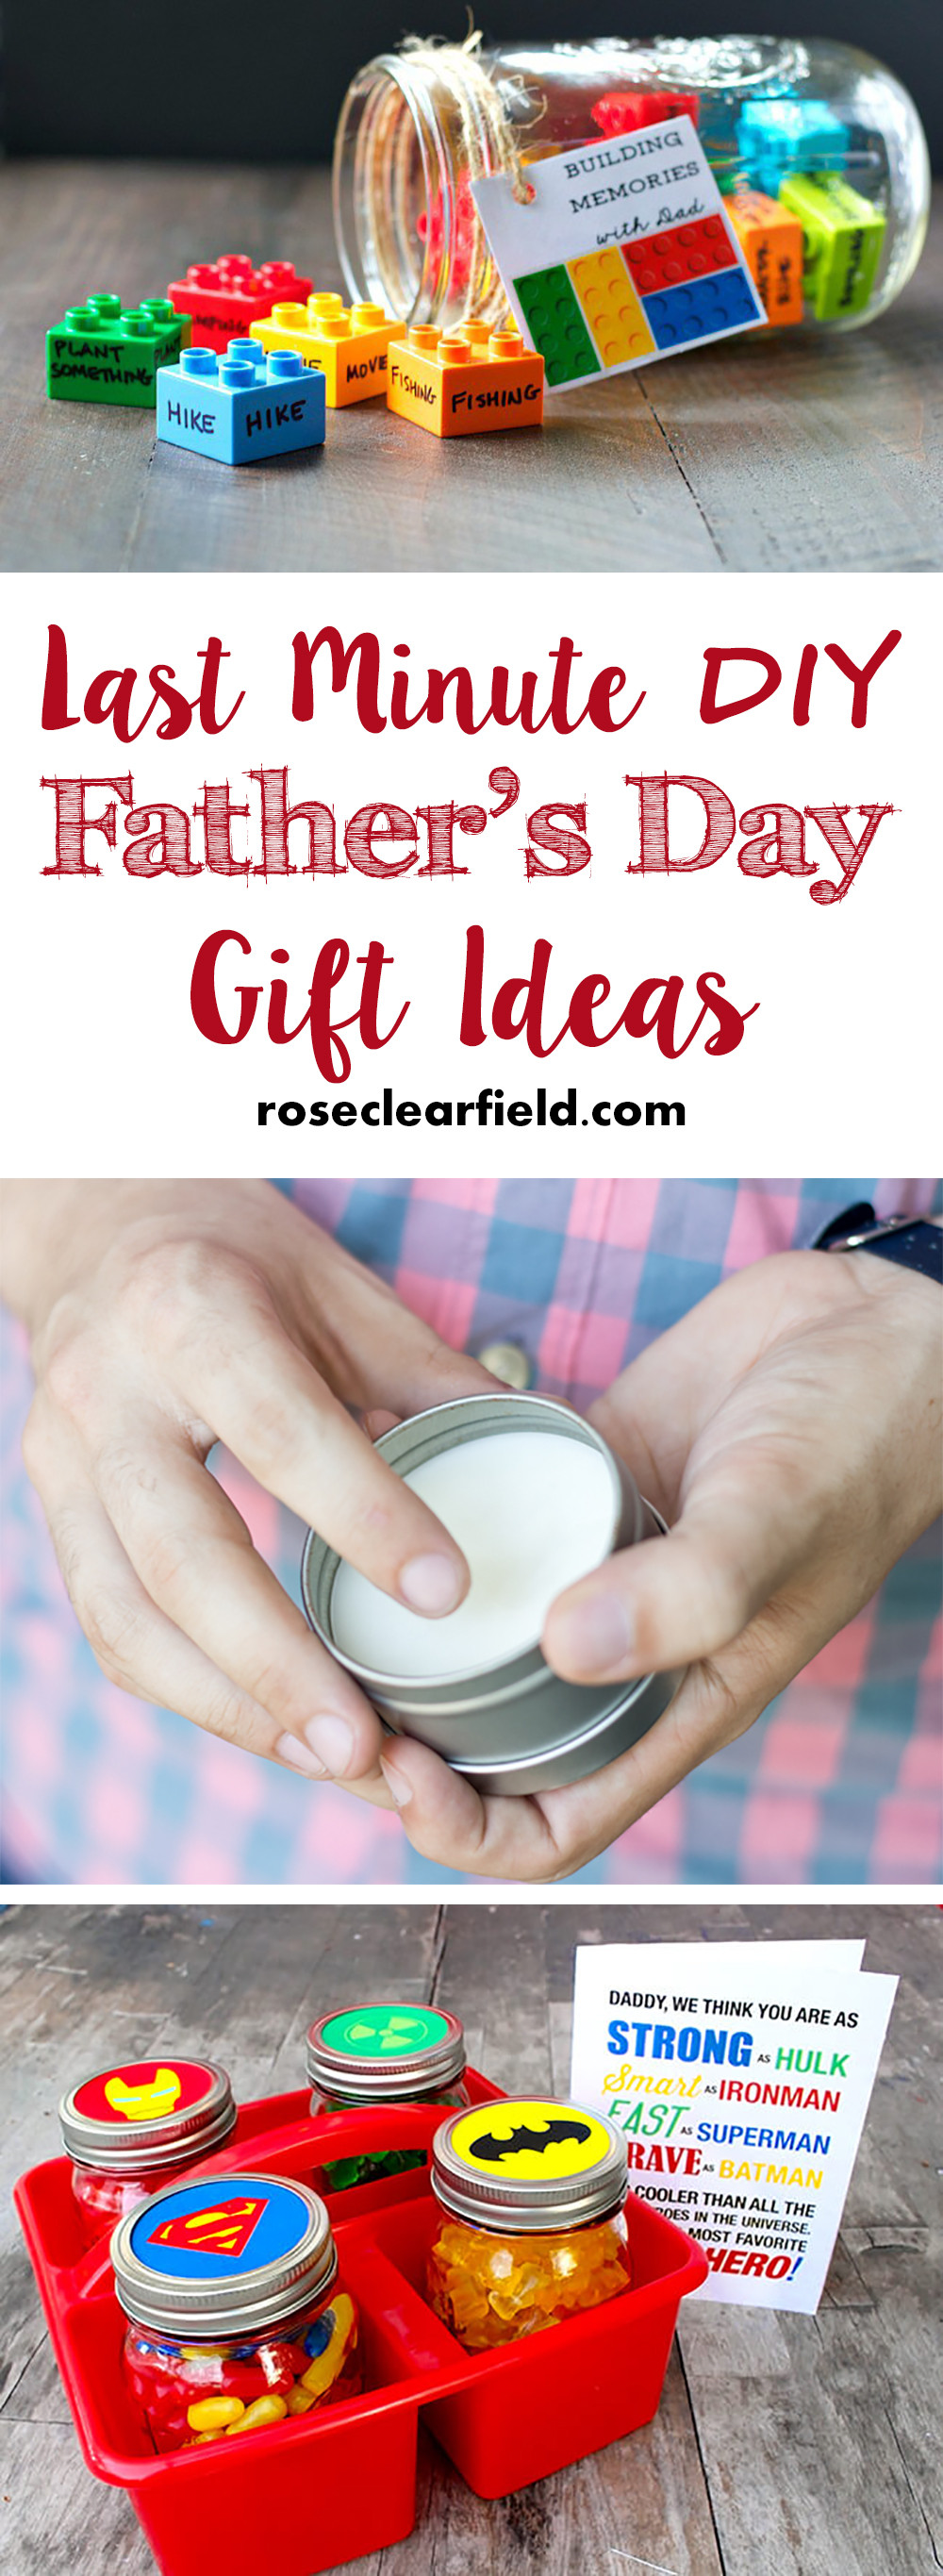 Diy Valentine'S Day Gift Ideas
 Last Minute DIY Father s Day Gift Ideas • Rose Clearfield